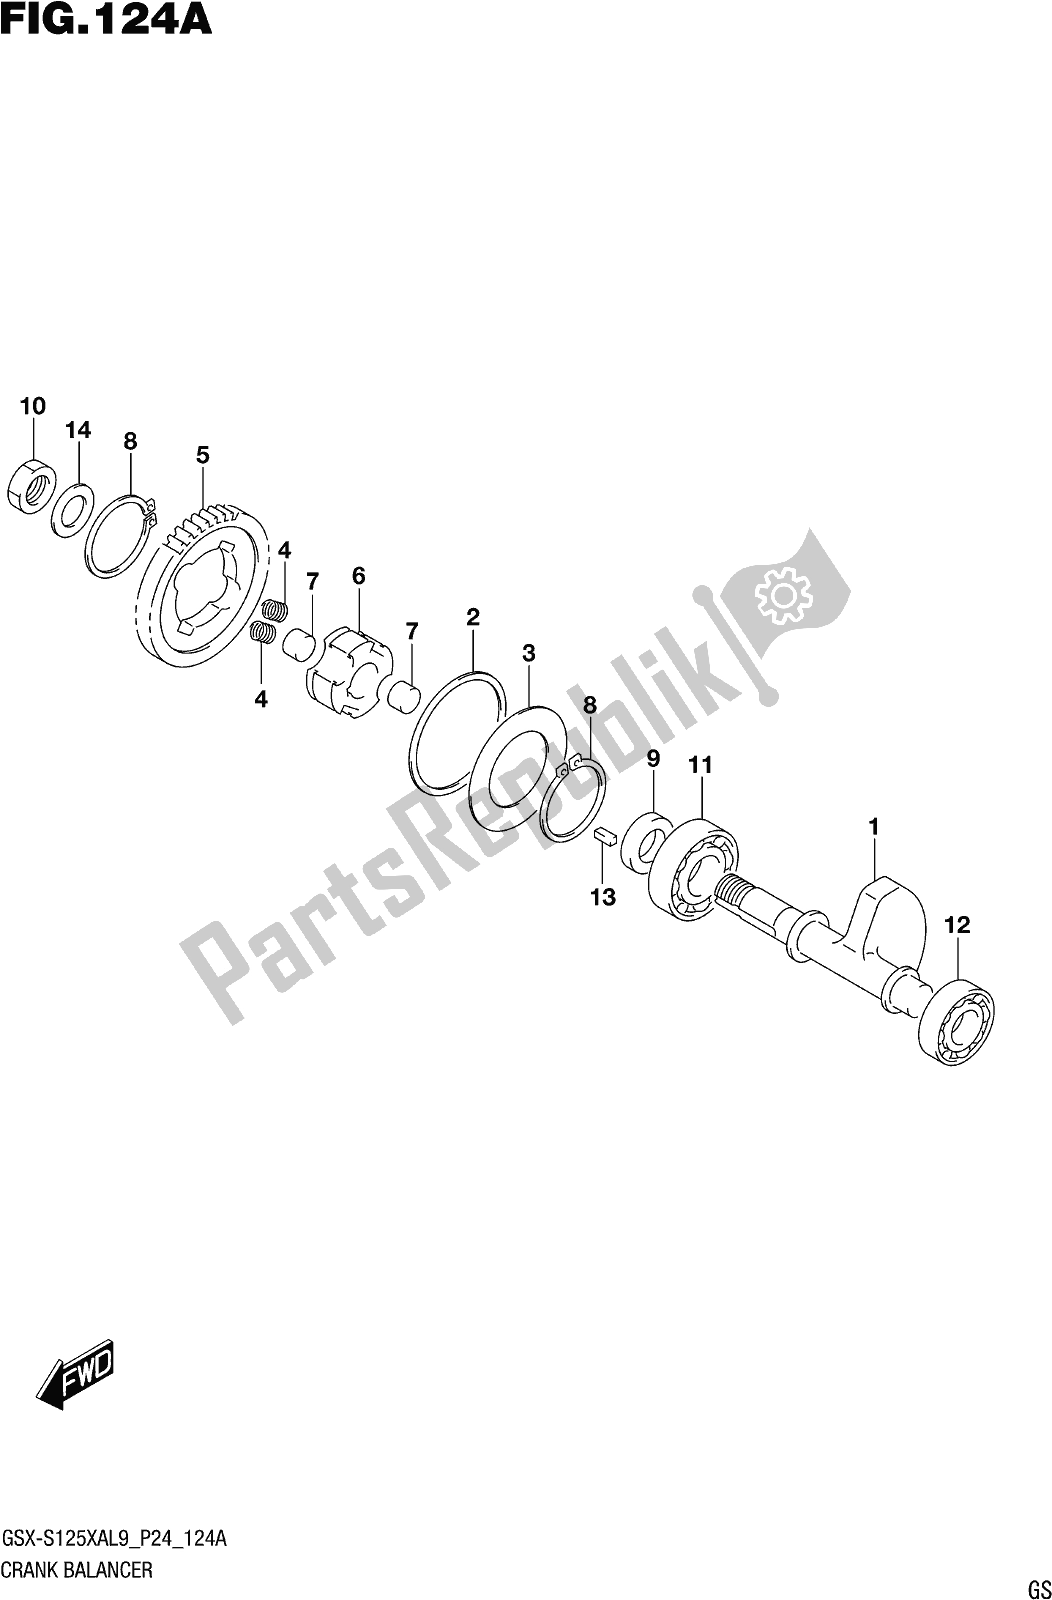 All parts for the Fig. 124a Crank Balancer of the Suzuki Gsx-s 125 XA 2019